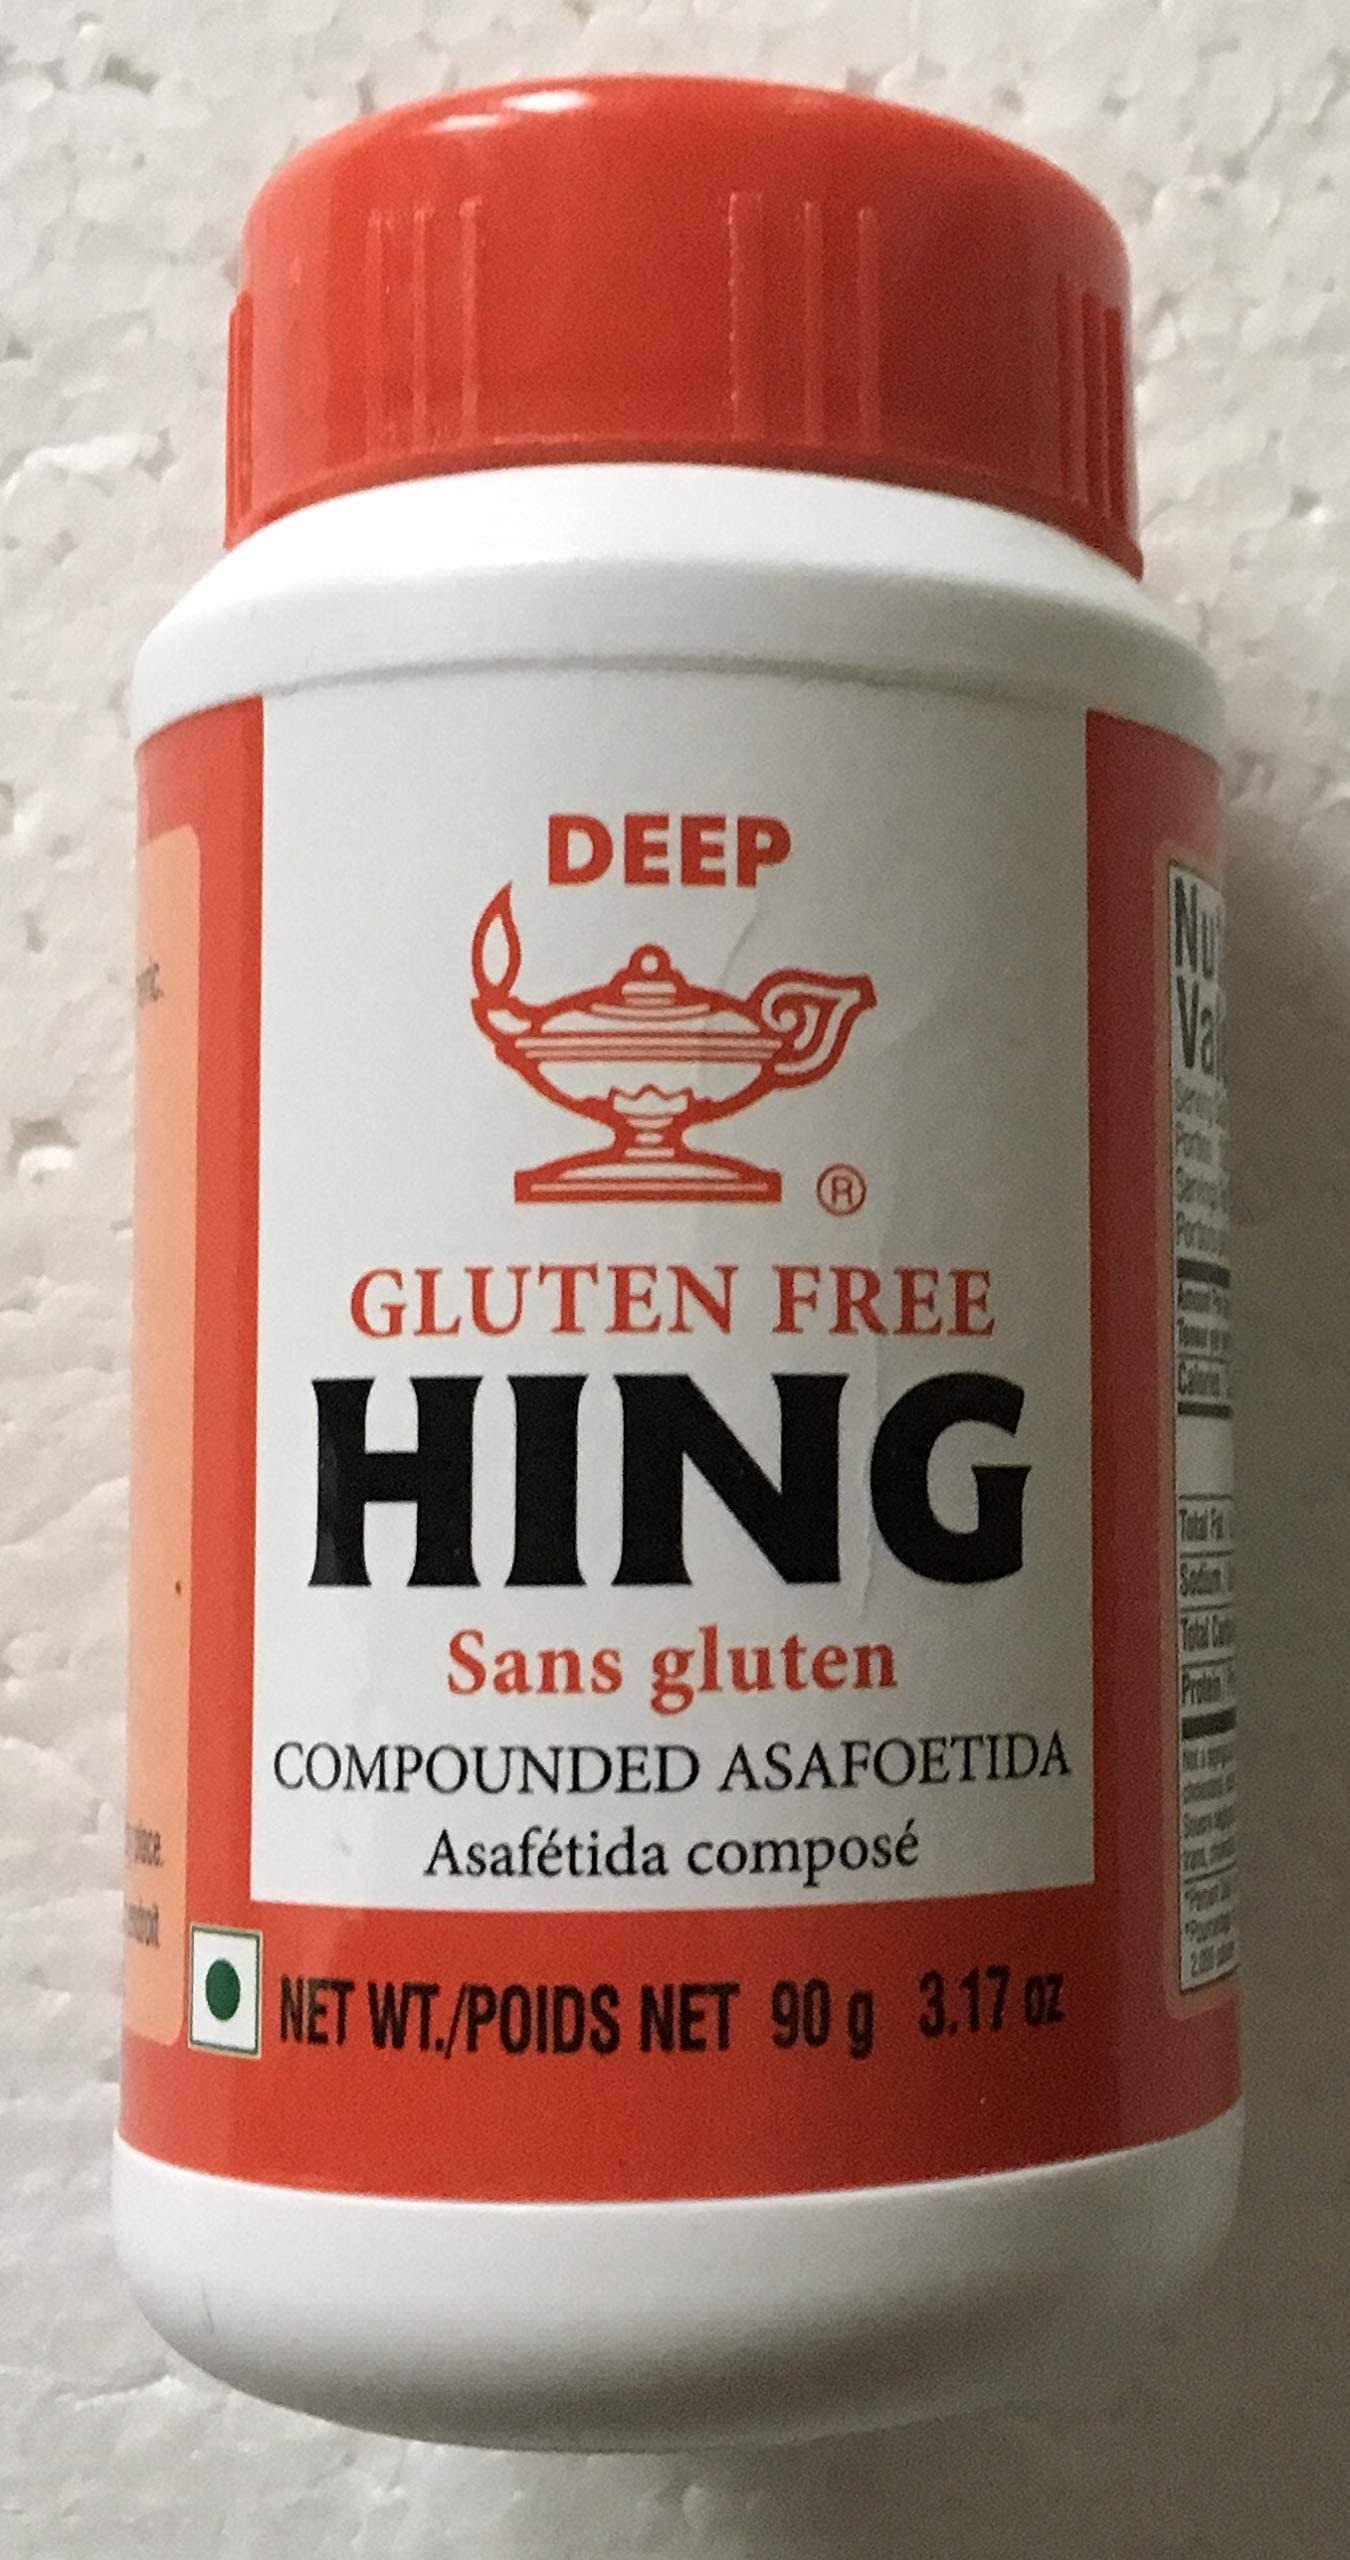 Deep Gluten Free Hing Compounded Asafoetida - 100 Grams